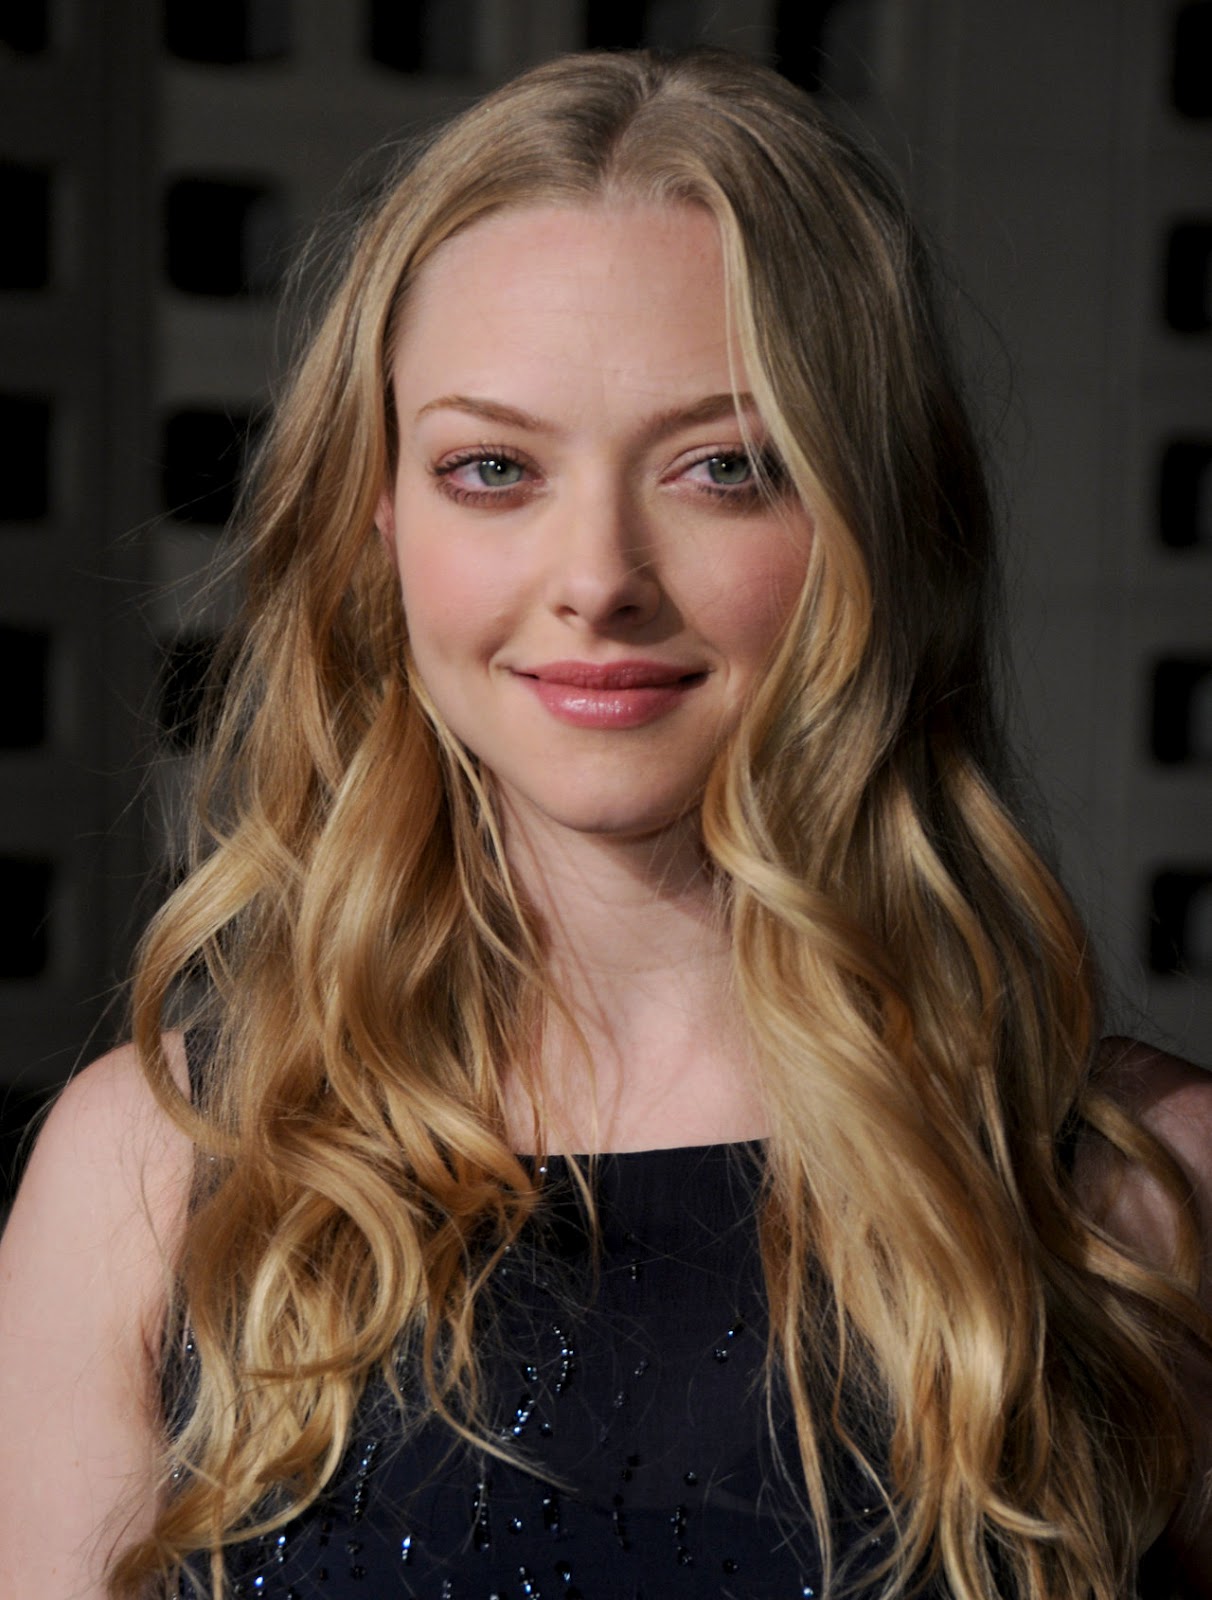 All Top Hollywood Celebrities: Amanda Seyfried Biography and Amanda Seyfried Pictures ...